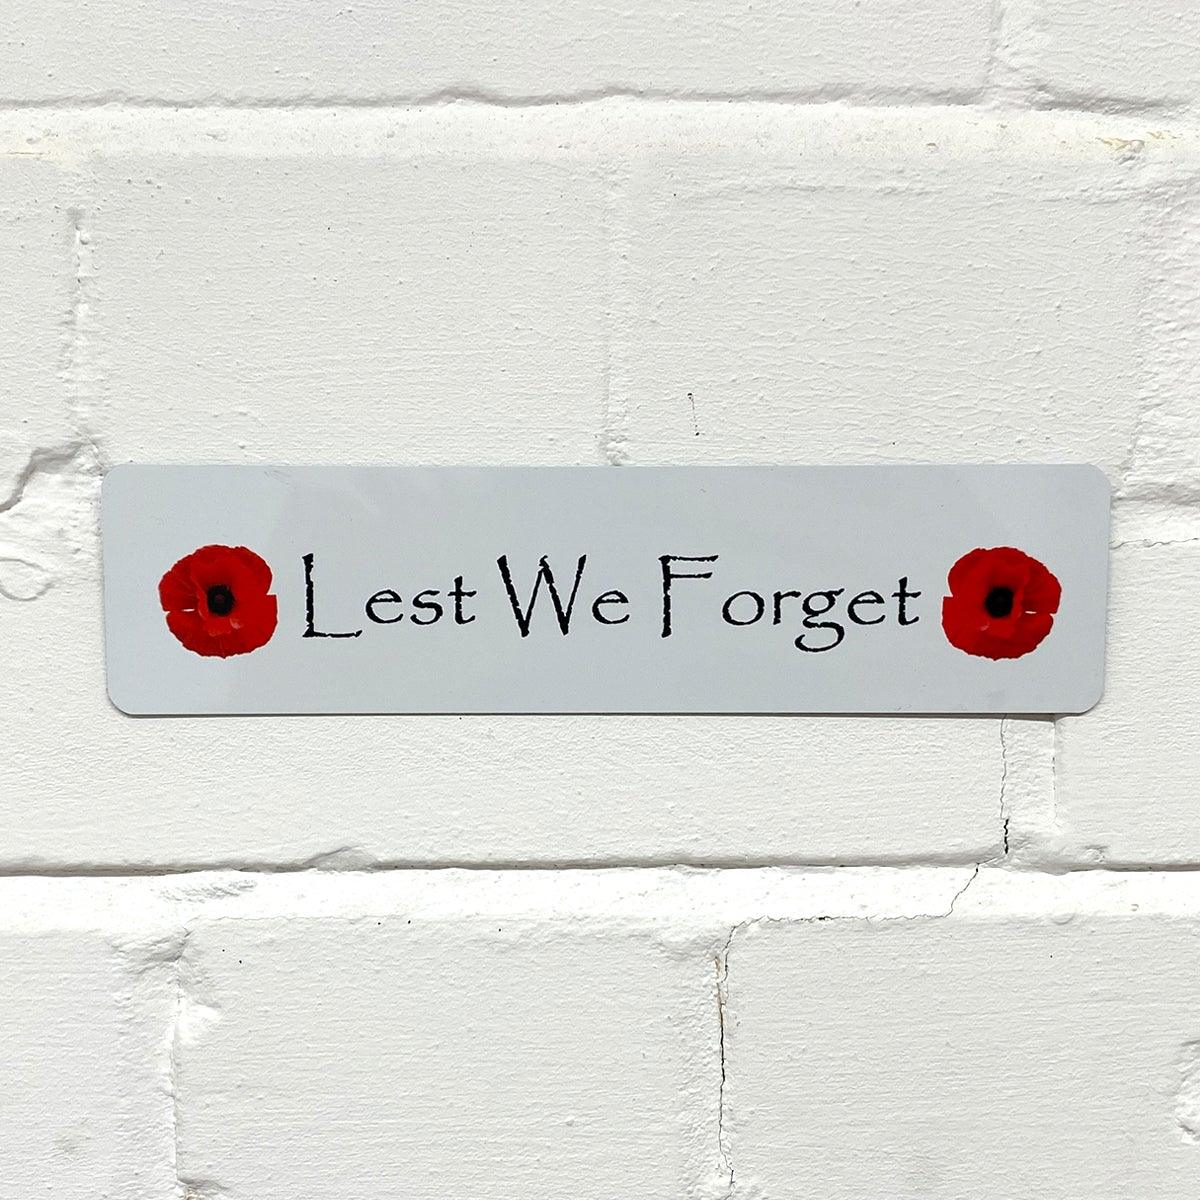 Military Poppy Lest We Forget Printed on Metal Aluminium Plaque (20x5 cm, 7.8x2 inches) - shopquality4u